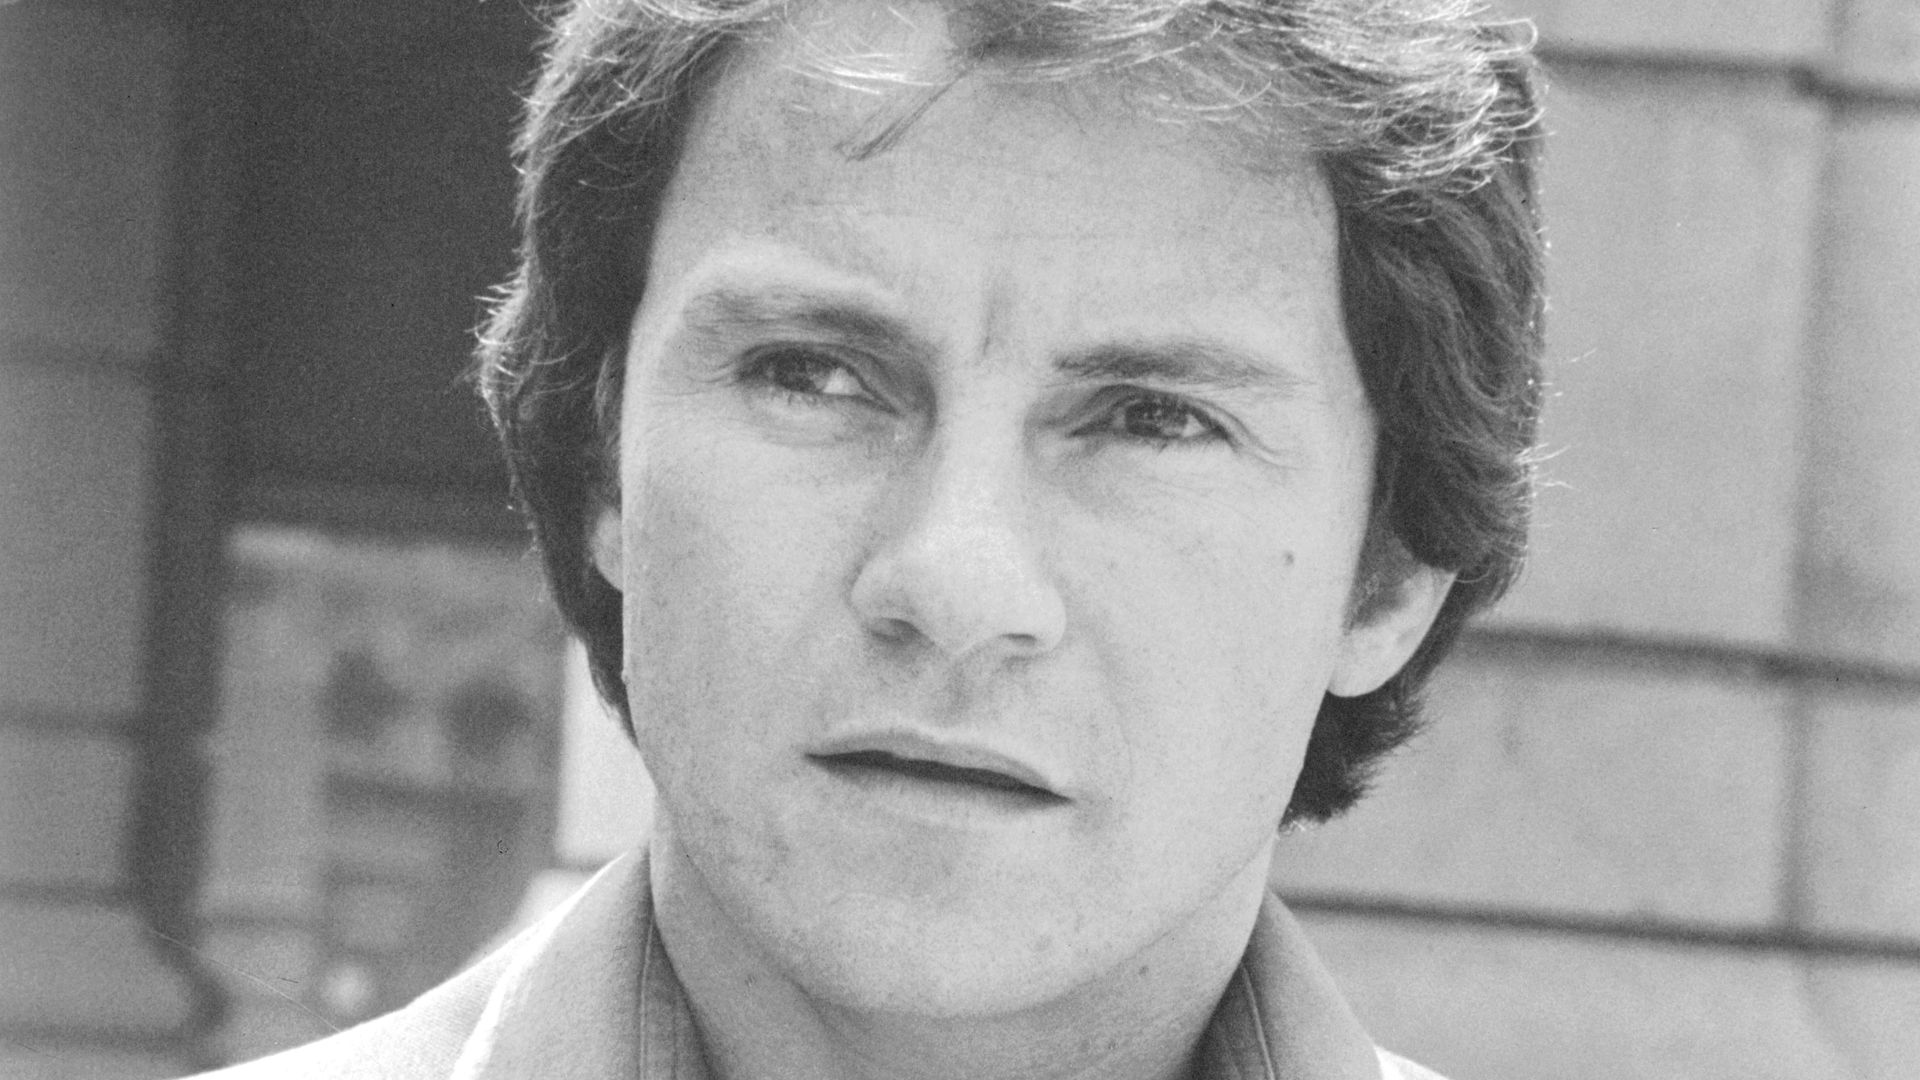 Harvey Keitel - Known For Portraying Morally Ambiguous And Tough-guy Characters